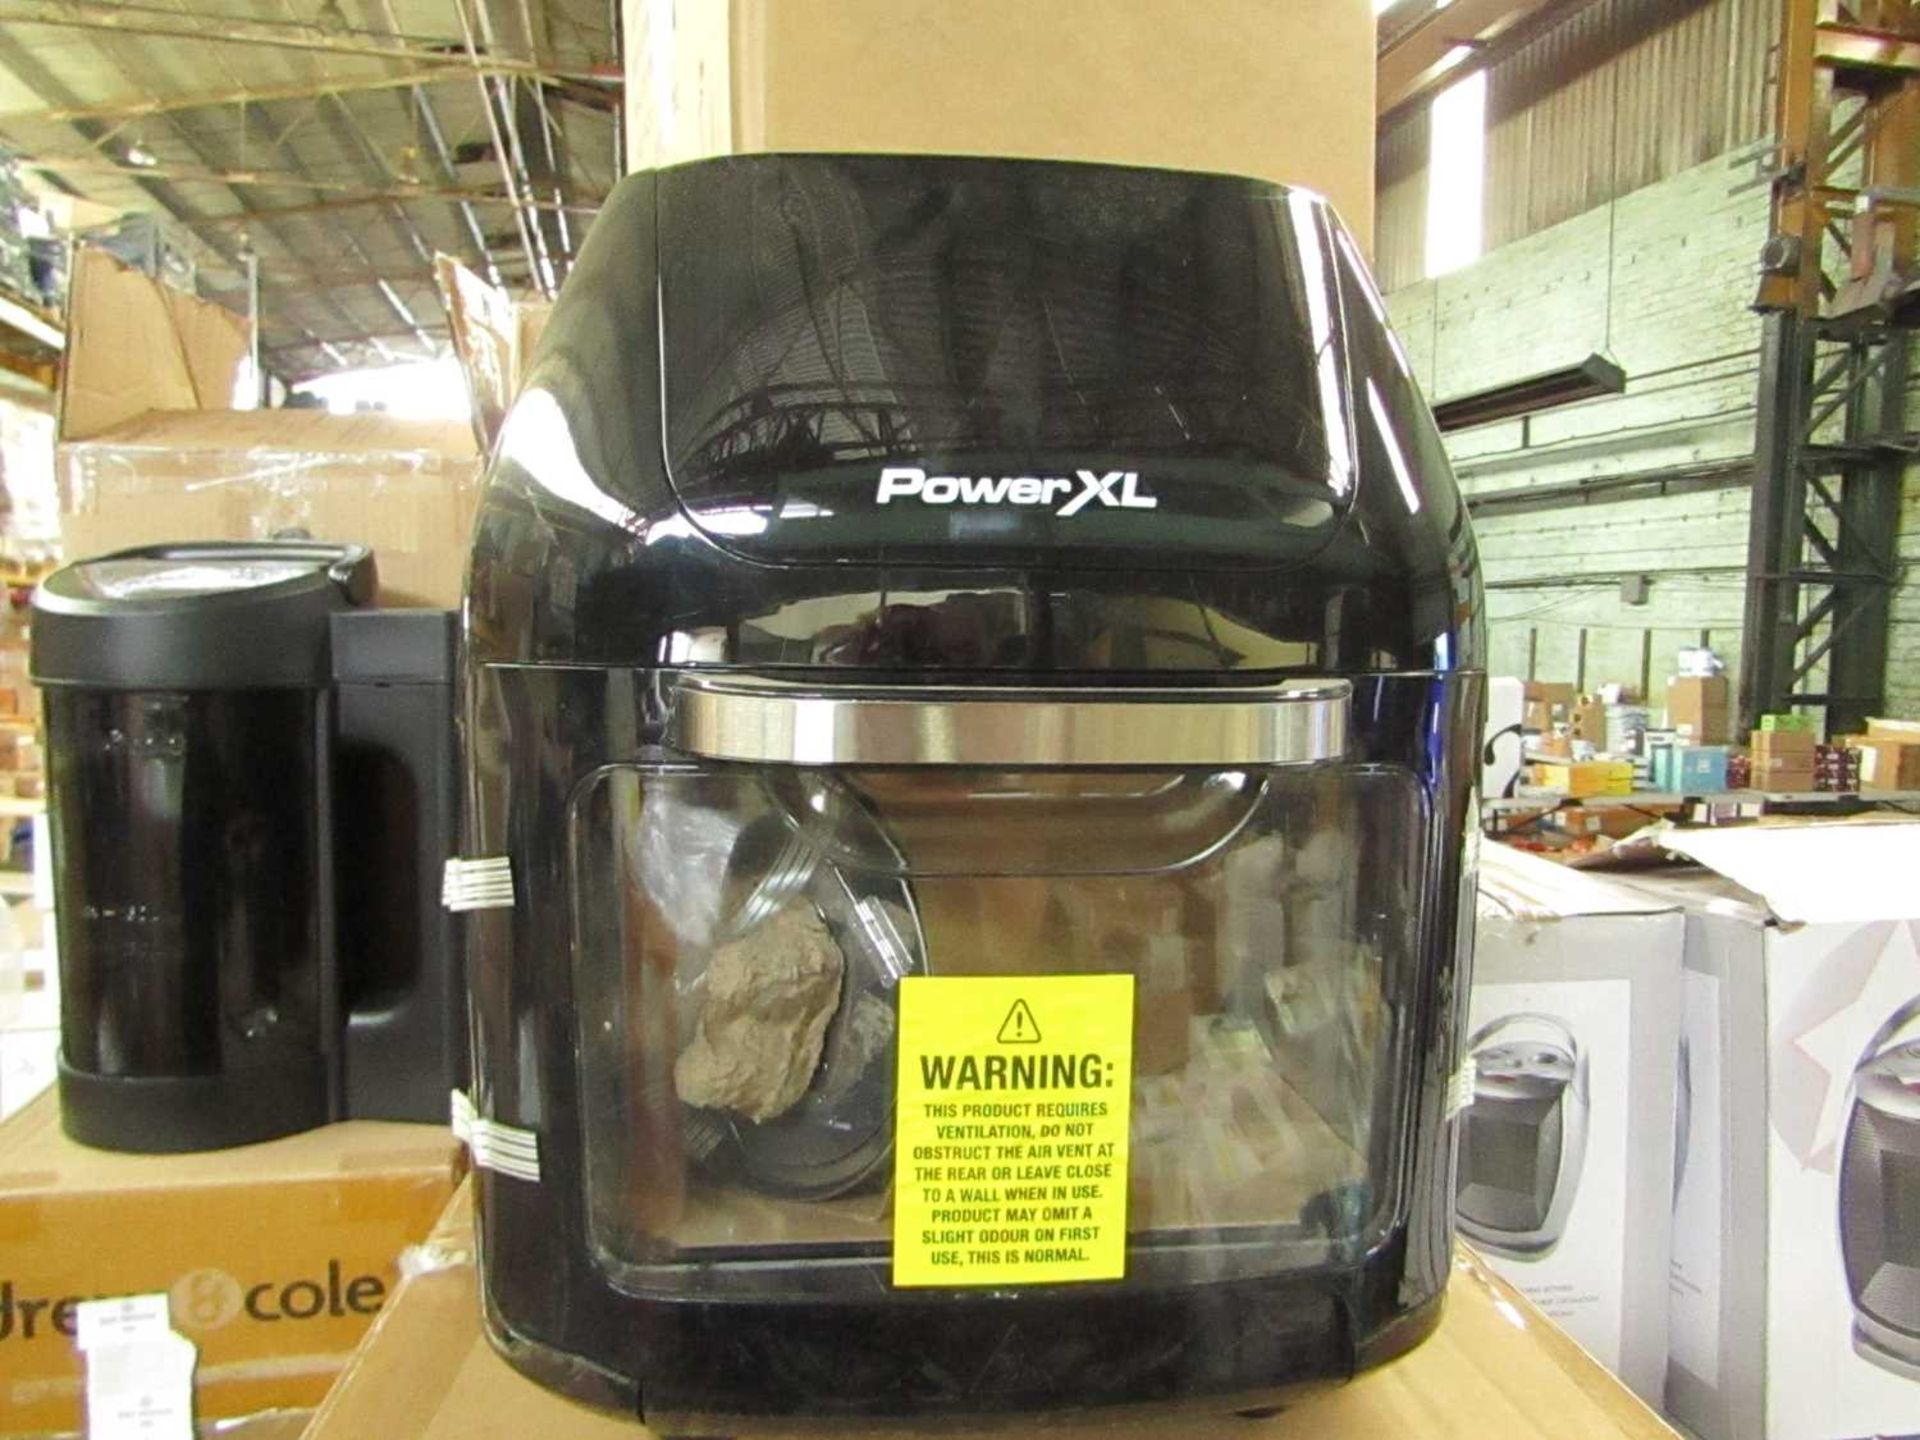 VAT | 1X | AIR FRYER COOKER | ITEM HAS BEEN PROFESSIONALLY REFURBISHED AND BOXED | NO ONLINE